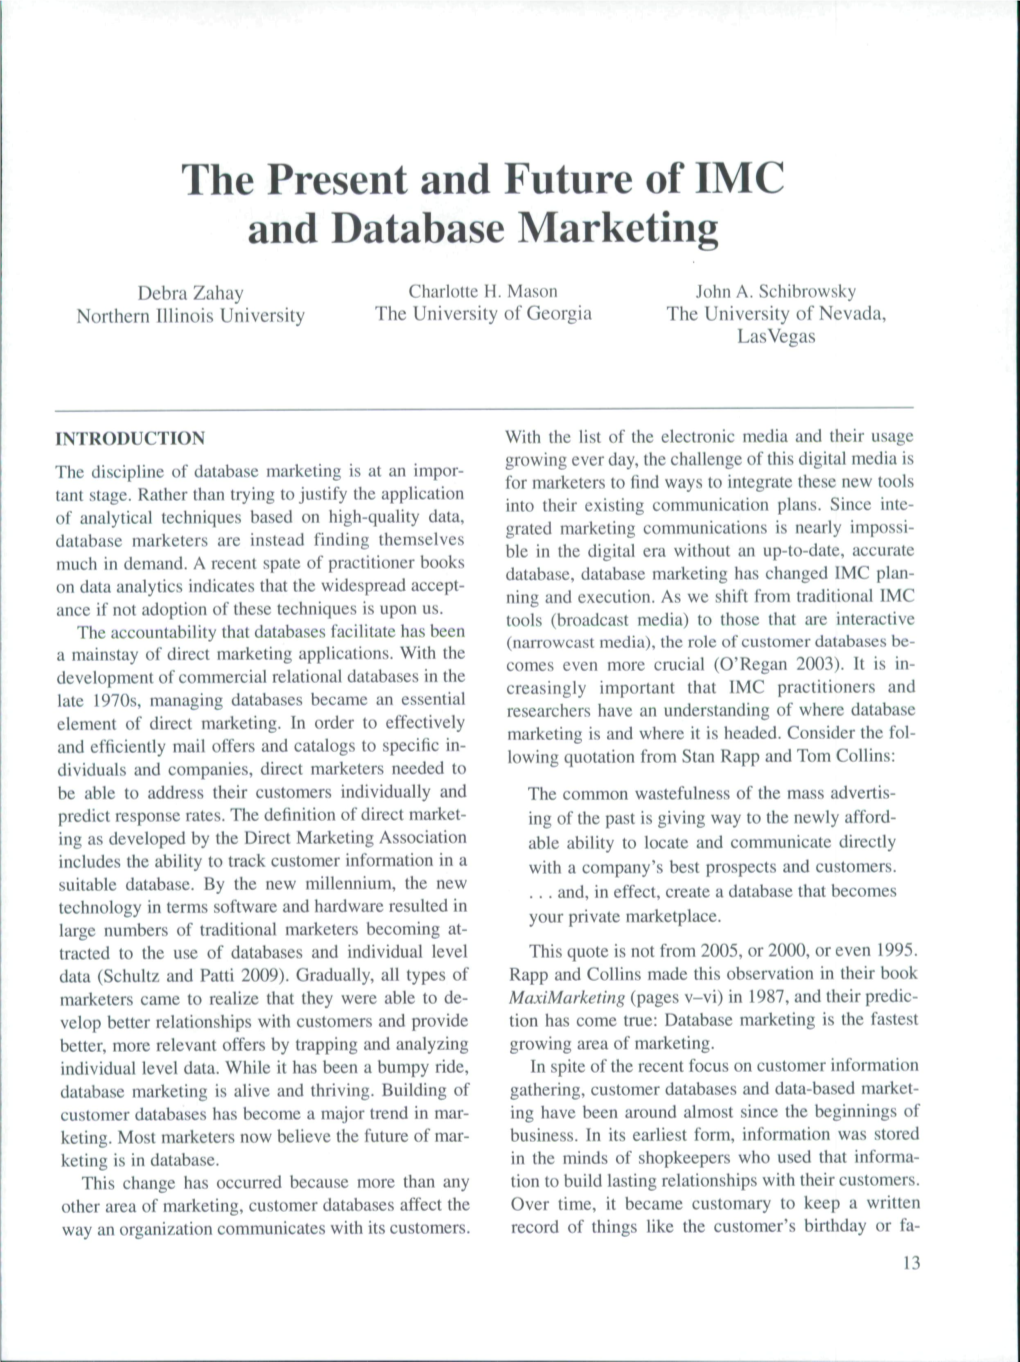 The Present and Future of IMC and Database Marketing